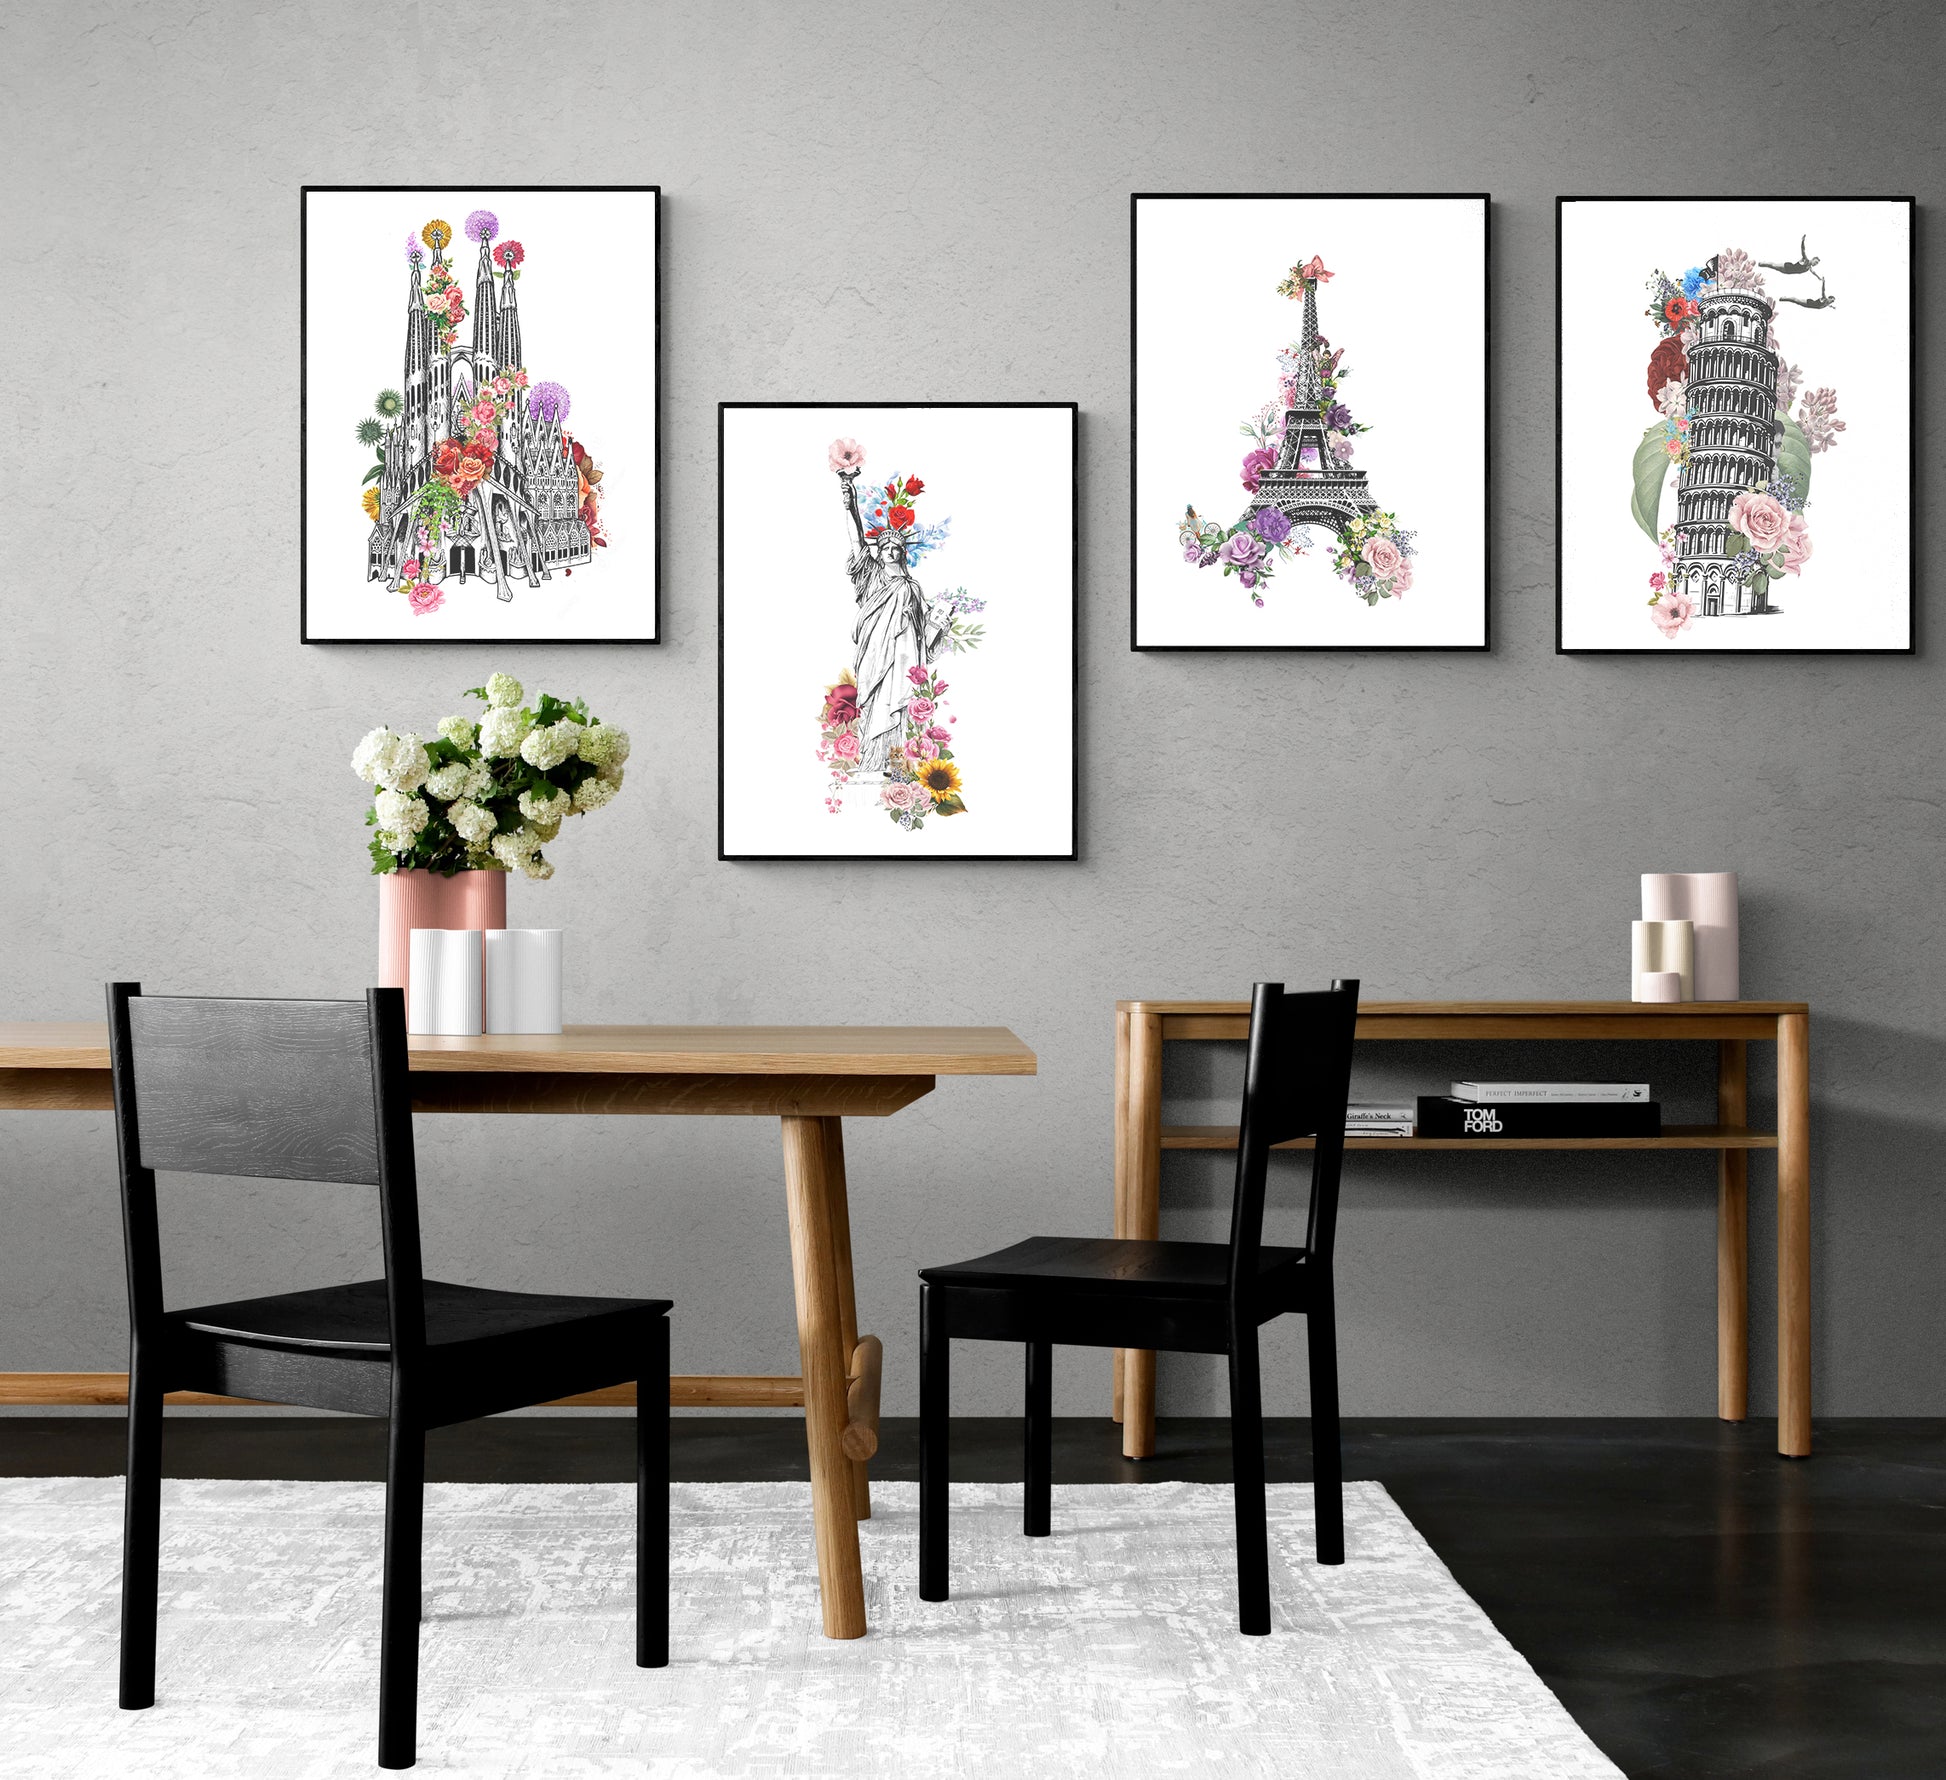 This poster features an eye-catching design of the iconic Eiffel Tower in Paris decorated with vibrant flowers. Perfect for learning and practicing human anatomy in art, the poster shows the details of each anatomical structure with a great blend of contours and colors. A great addition to any art space, this beautiful poster will be sure to enhance the artistic atmosphere.